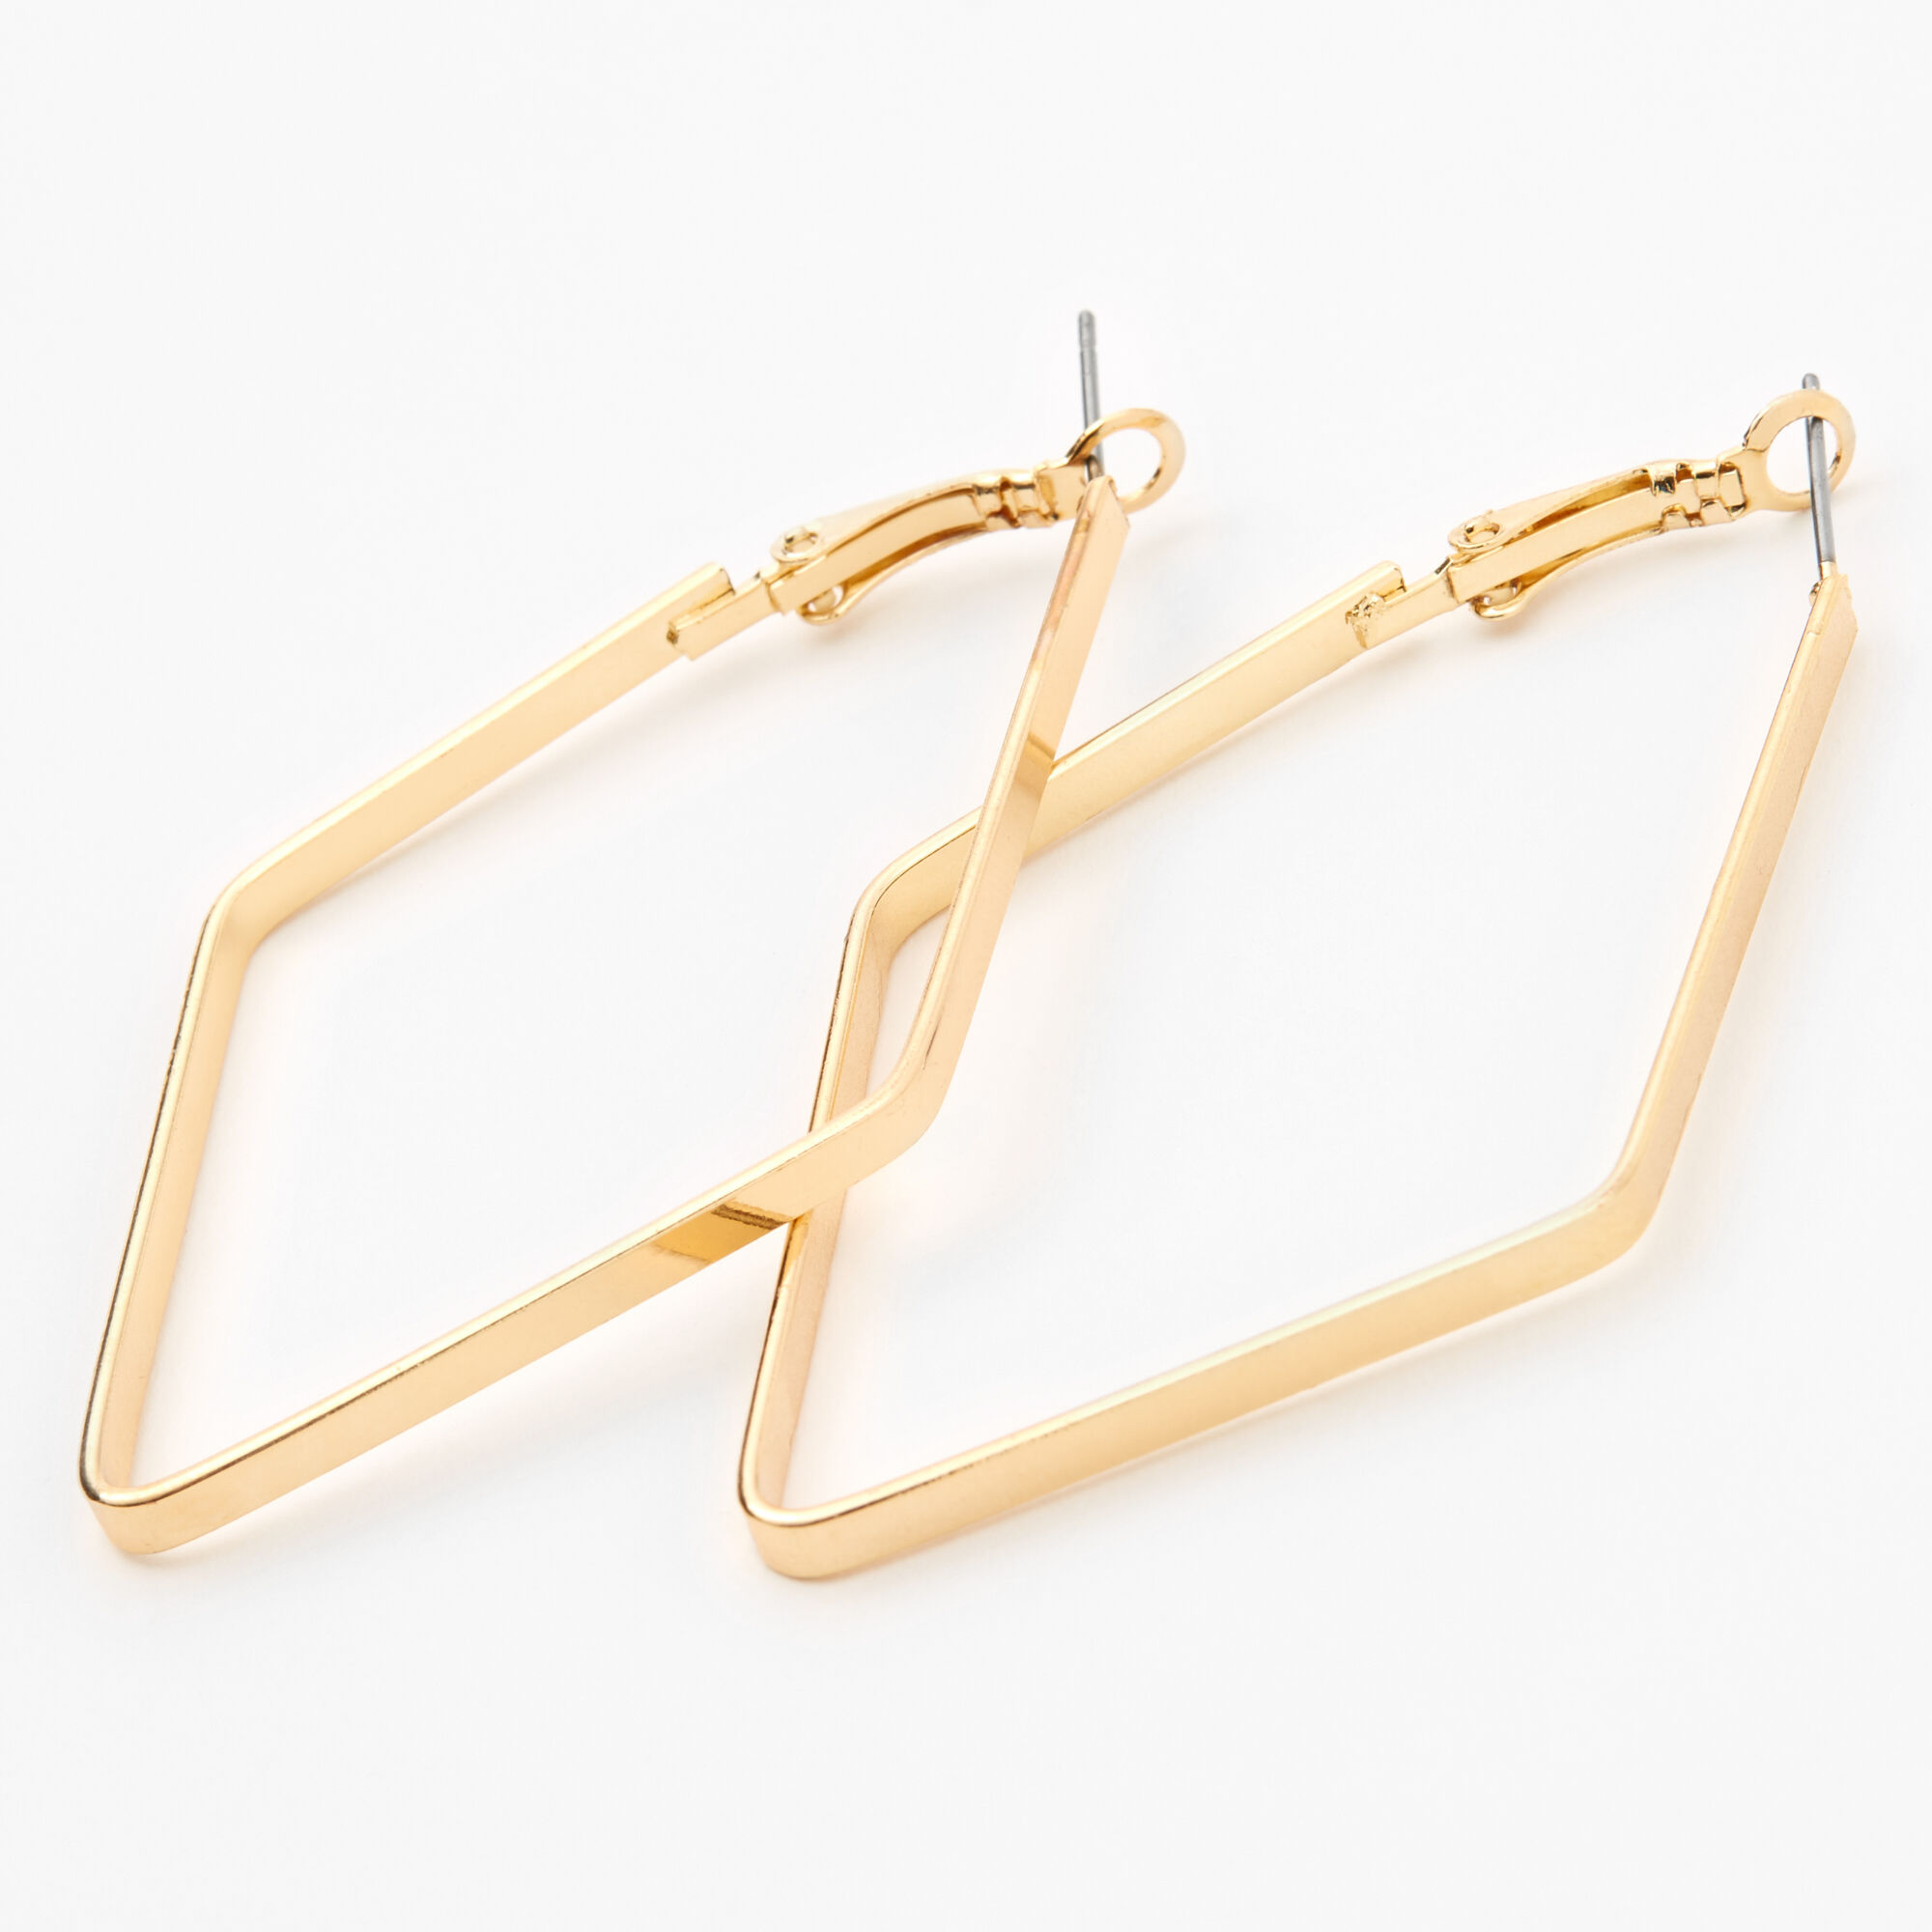 View Claires Tone 60MM Geometric Hoop Earrings Gold information